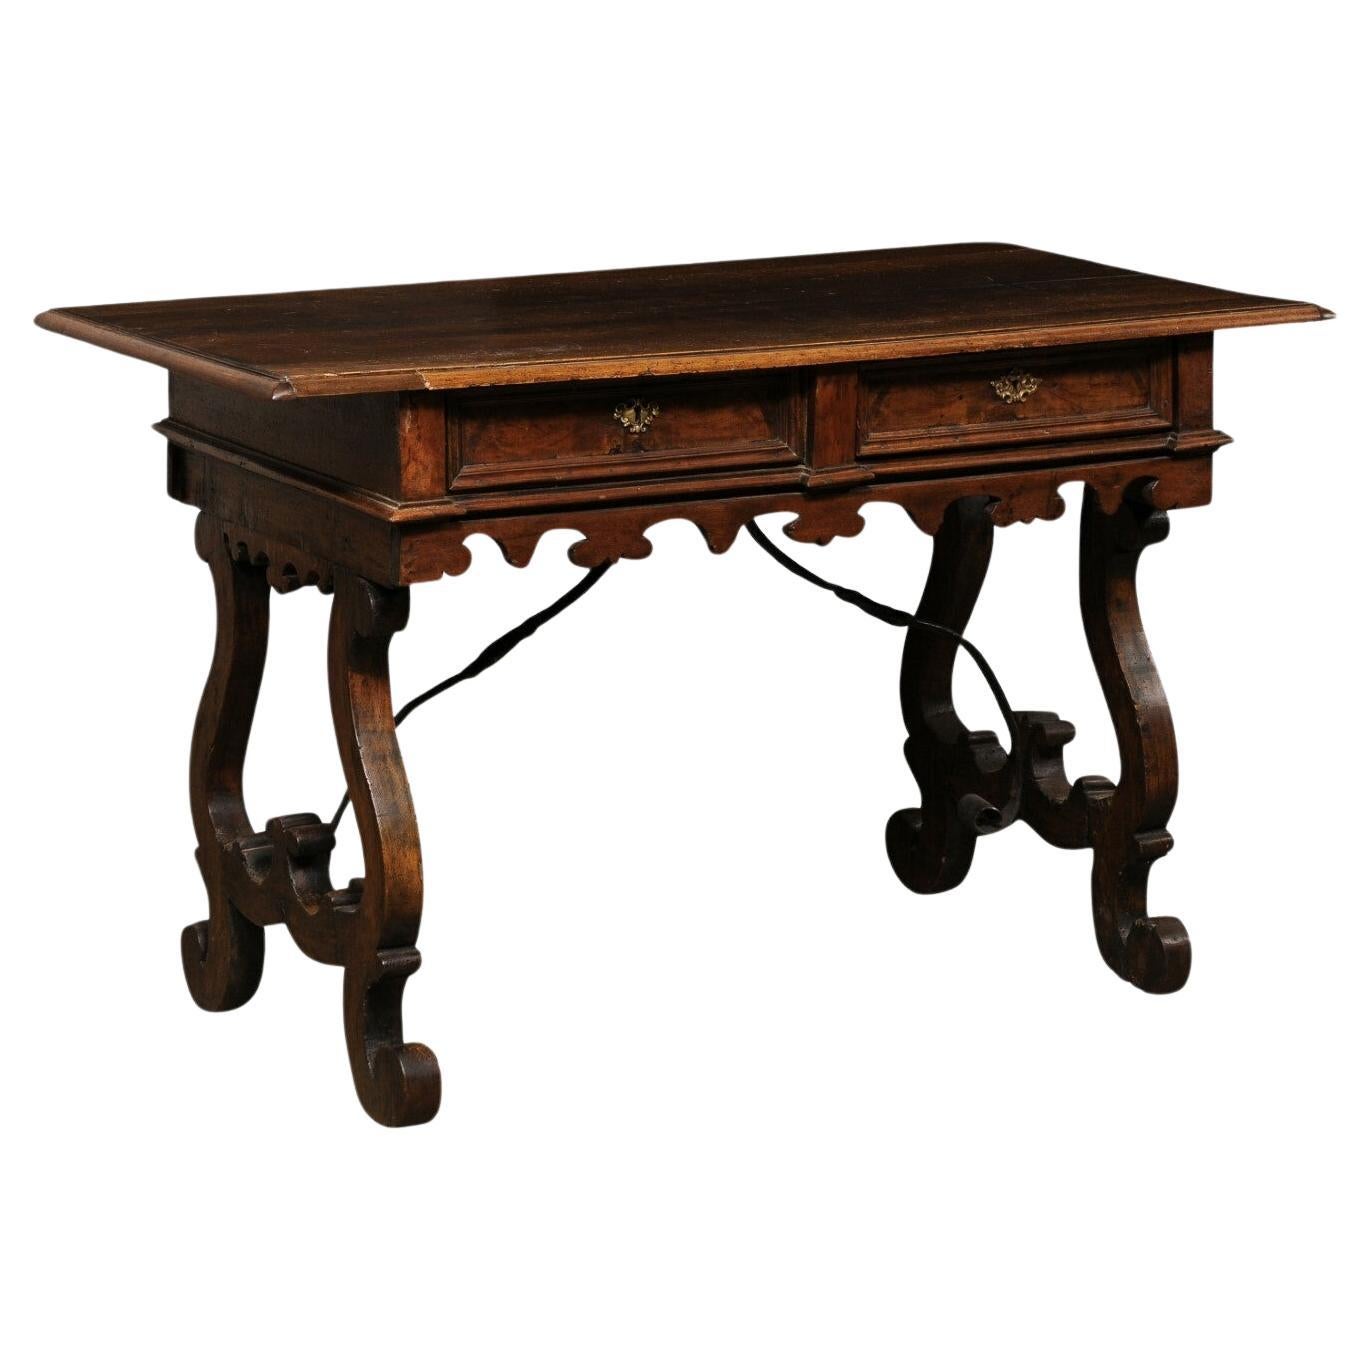 Late 18th Century Italian Fratino Table w/Drawers & Forged Iron Stretcher For Sale